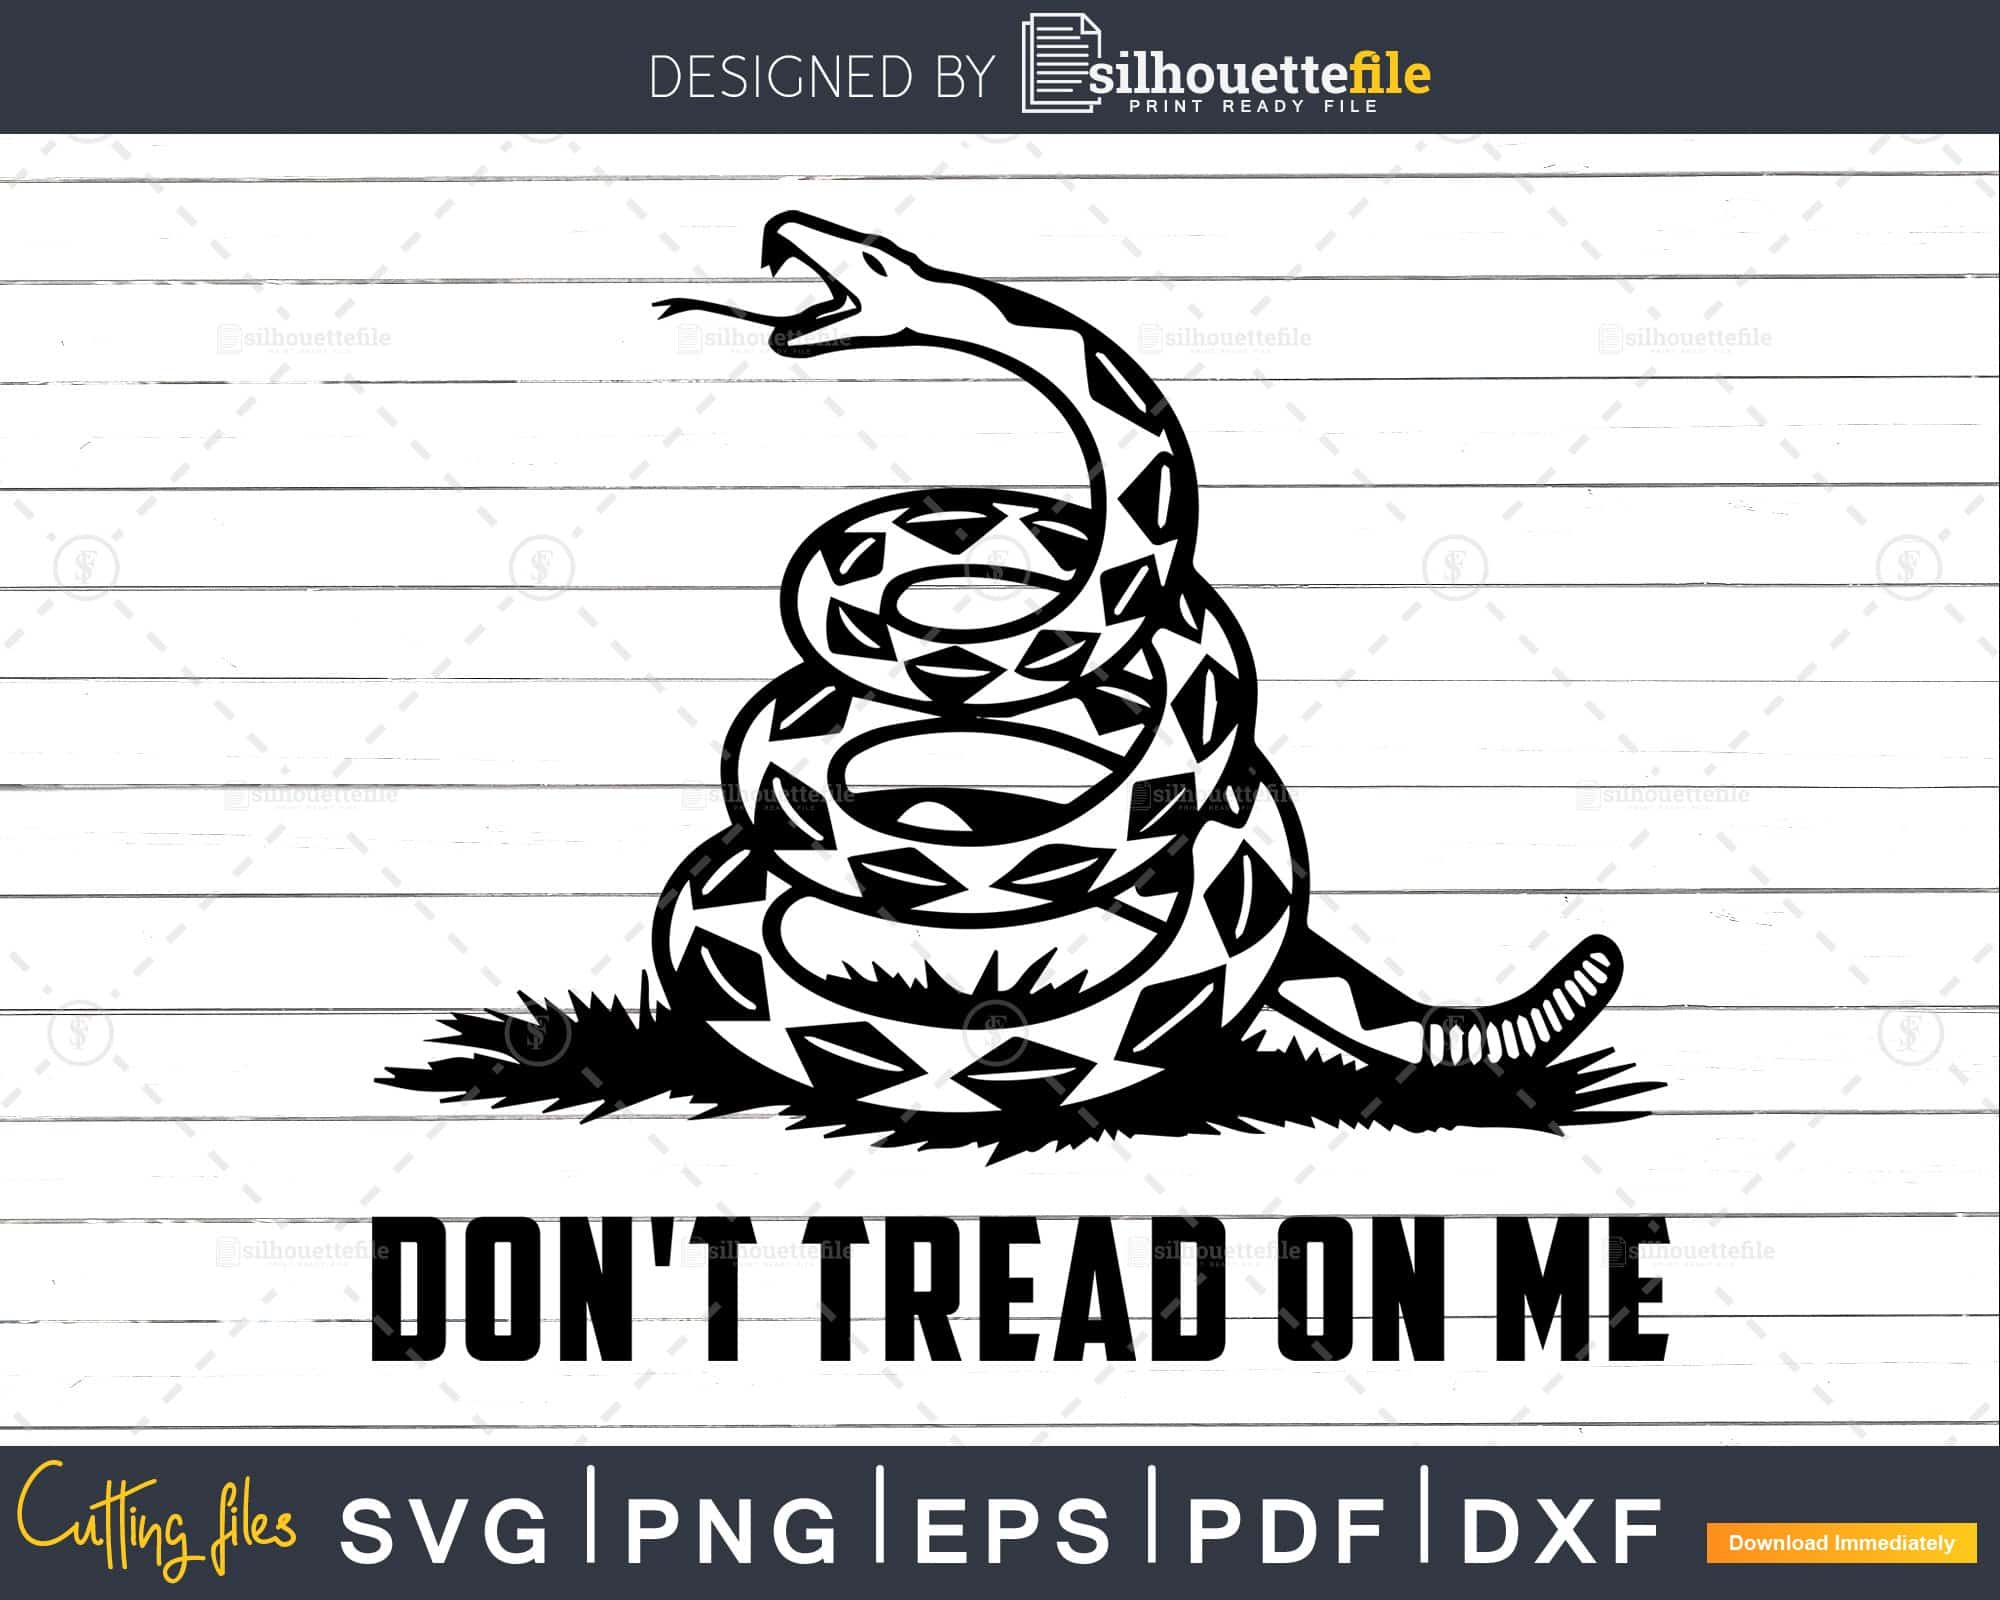 http://silhouettefile.com/cdn/shop/products/dont-tread-on-me-download-svg-eps-png-dxf-files-silhouettefile-895.jpg?v=1664772018